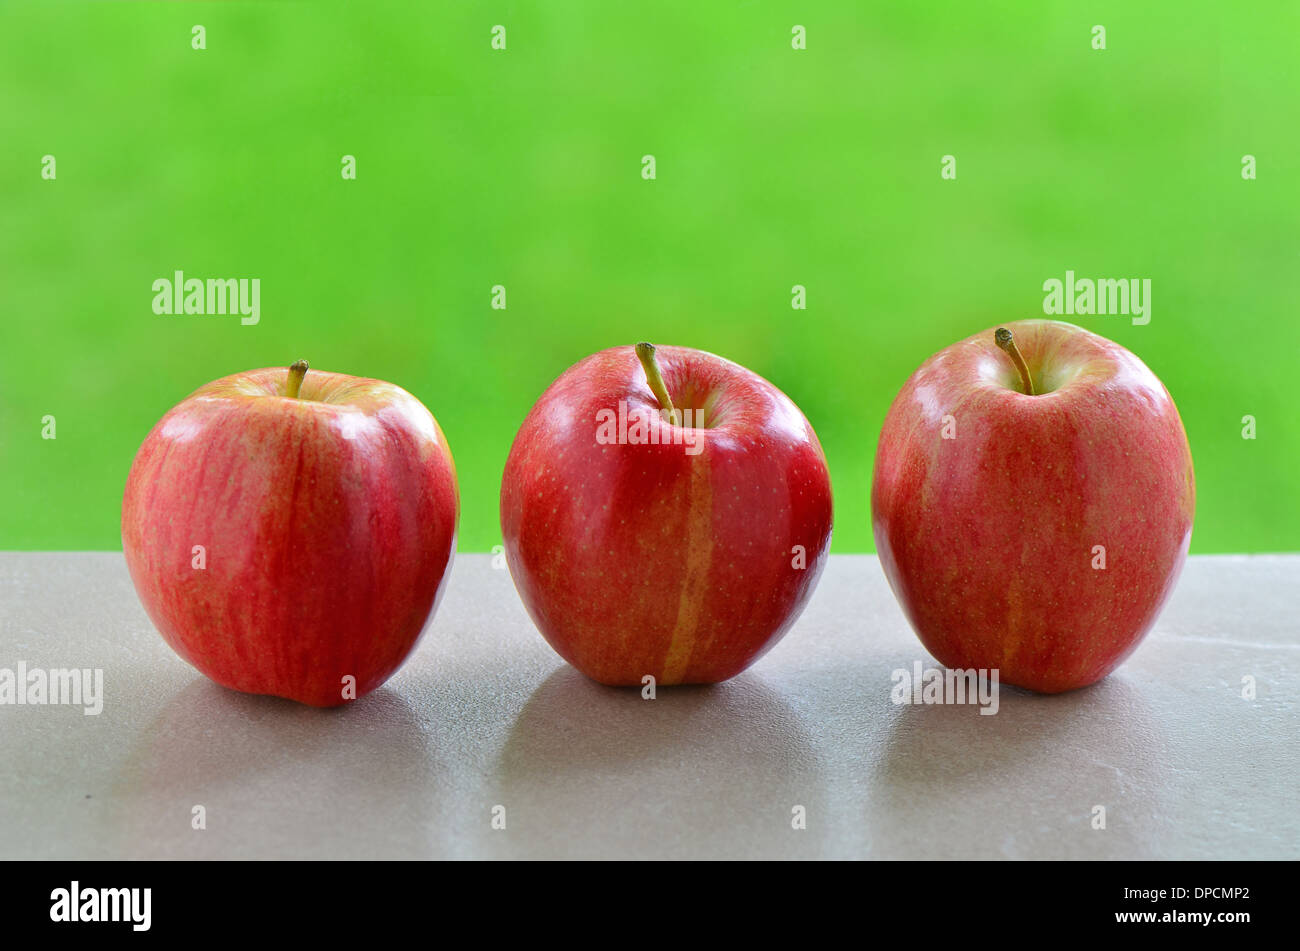 Delicious Gala apples on windowsill with vibrant green background Stock Photo